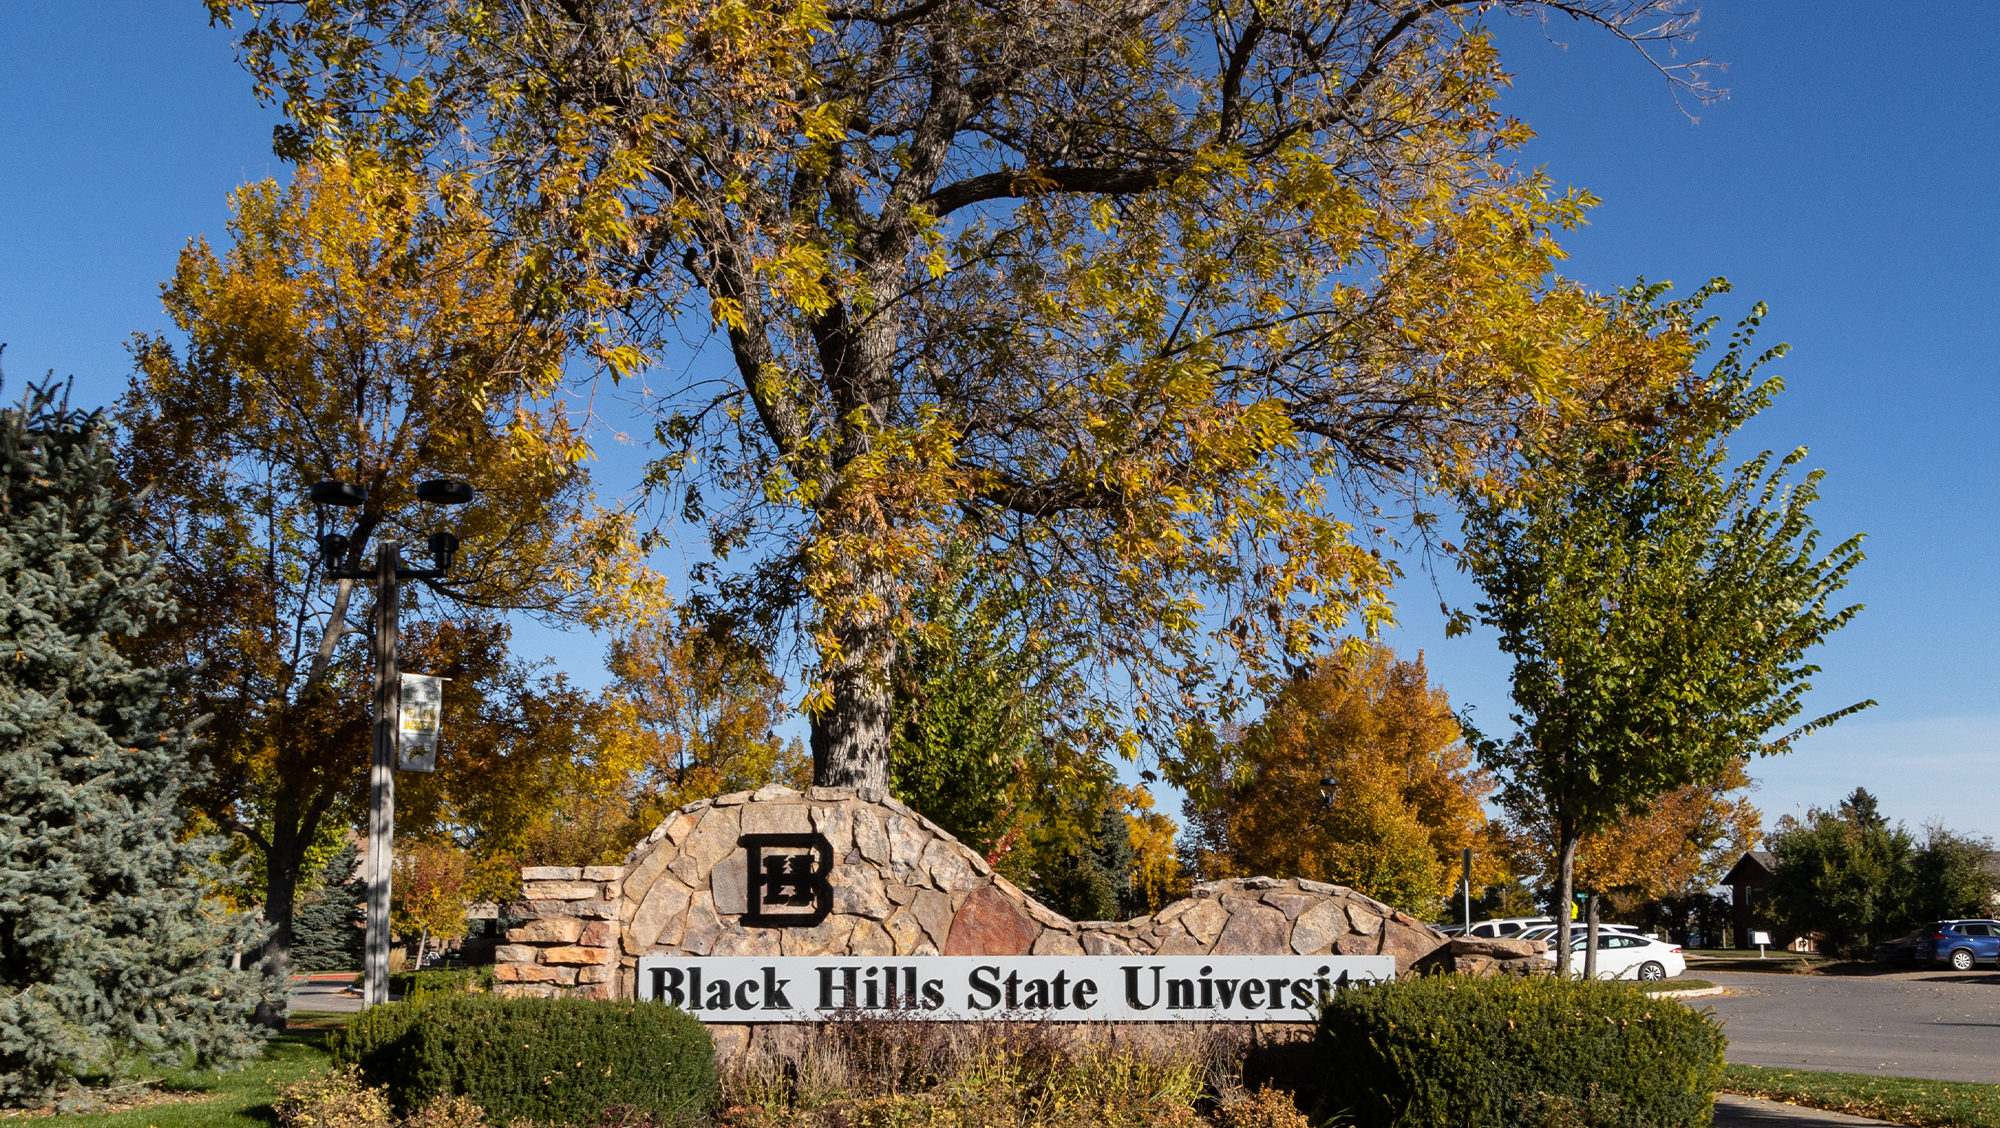 An engraving that reads Black Hills State University on a stone background.